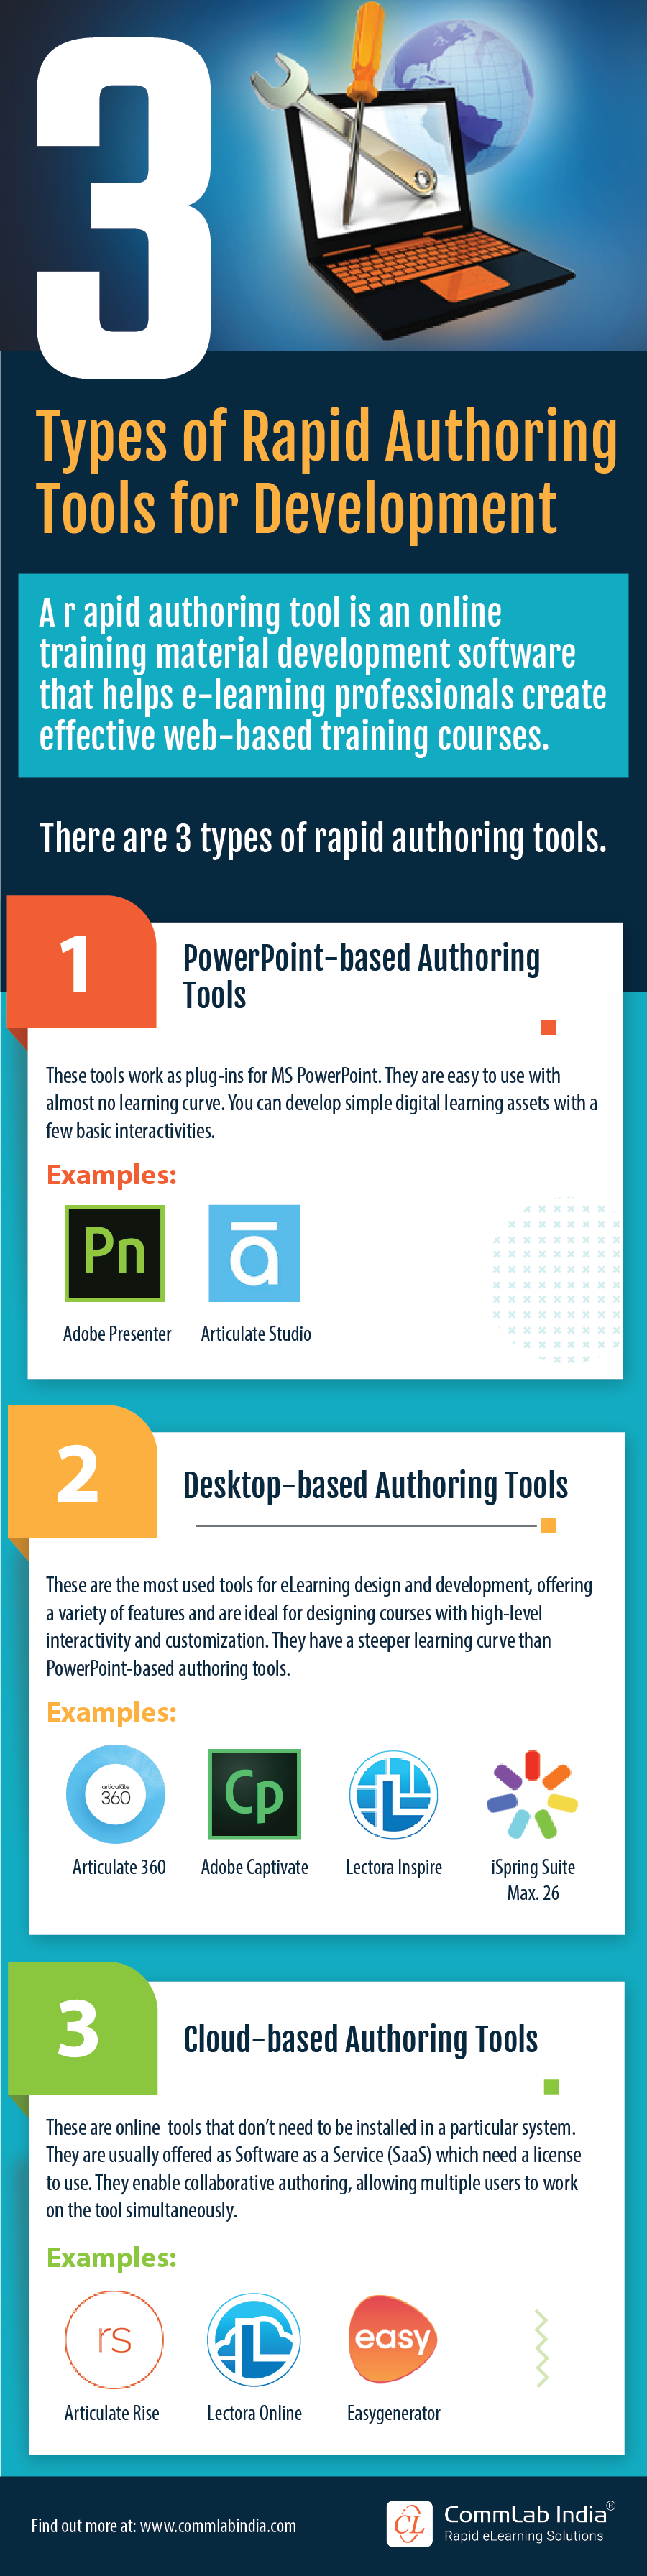 Types of Authoring Tools